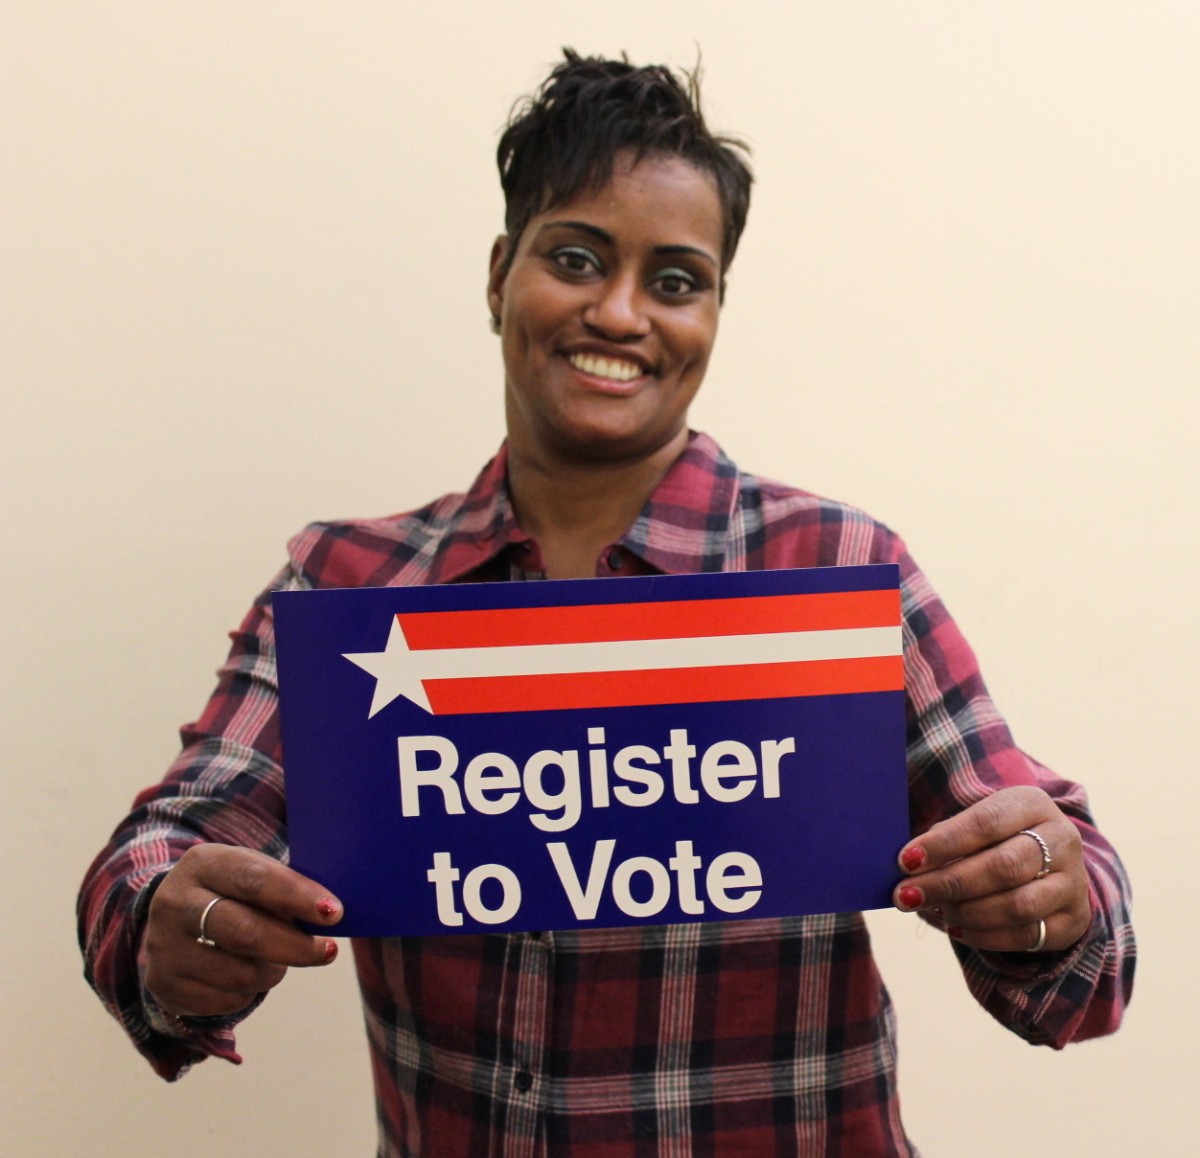 Lakesha has helped more than 50 people register to vote this month. Image credit: Denise Miller.